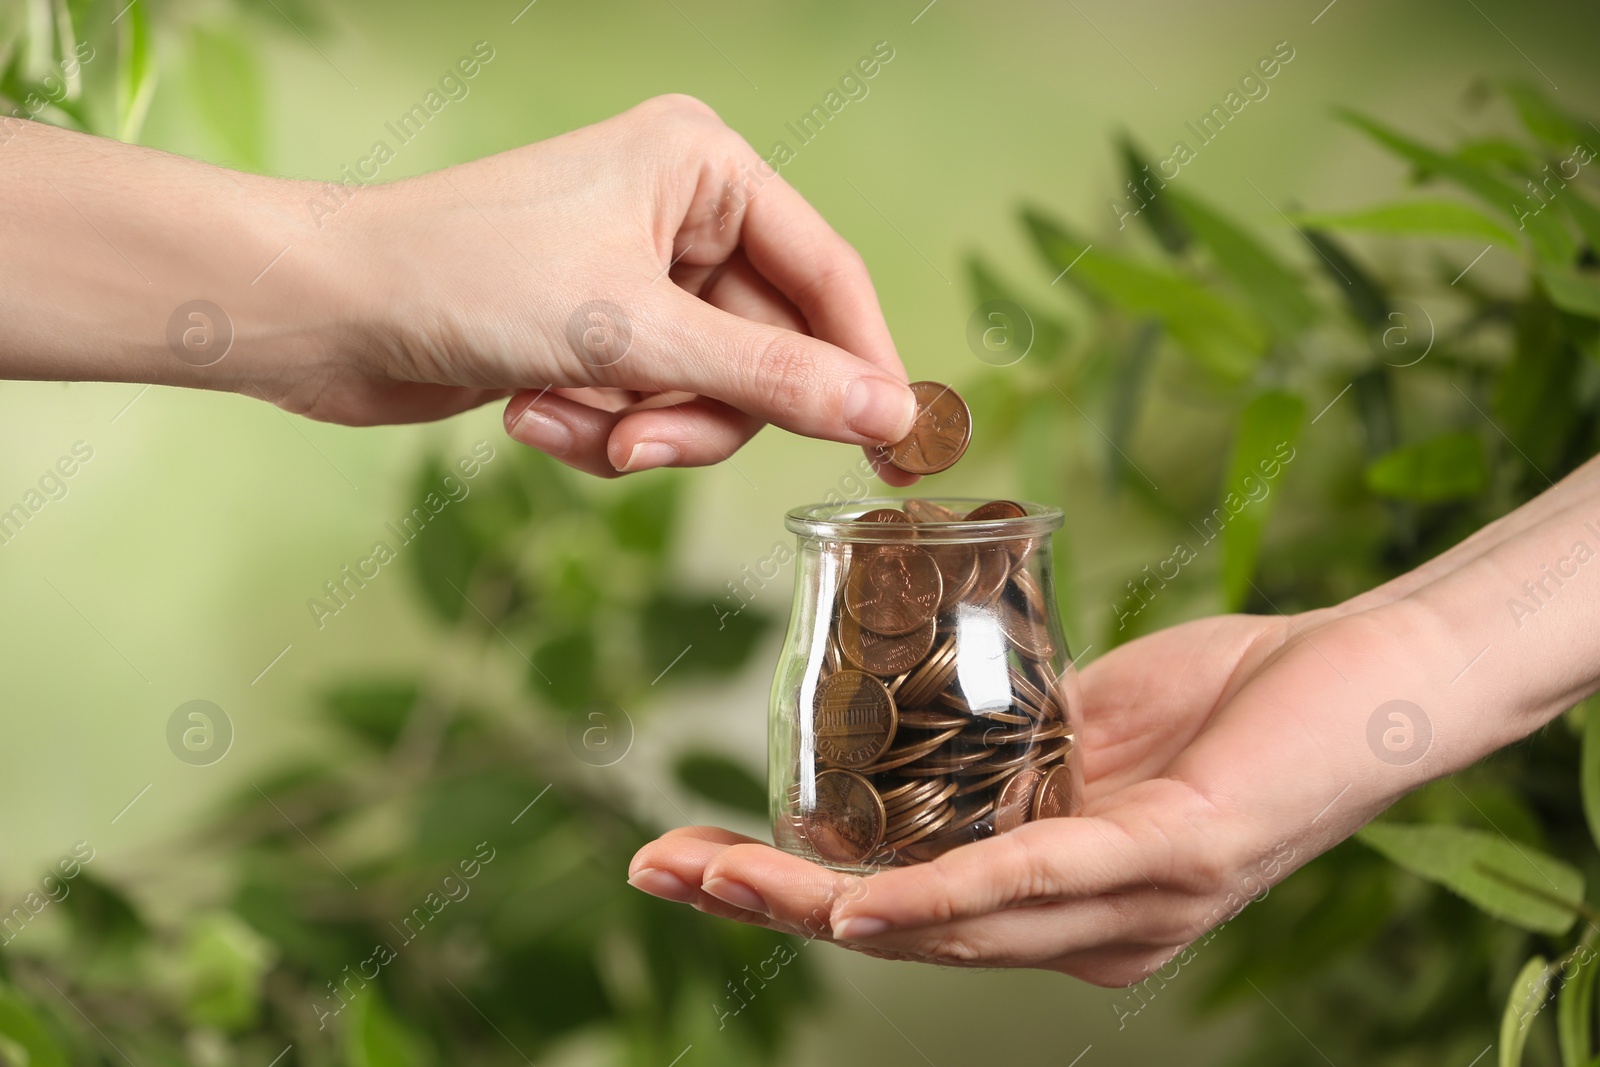 Photo of Woman giving coin to other person on blurred background, closeup. Money transfer